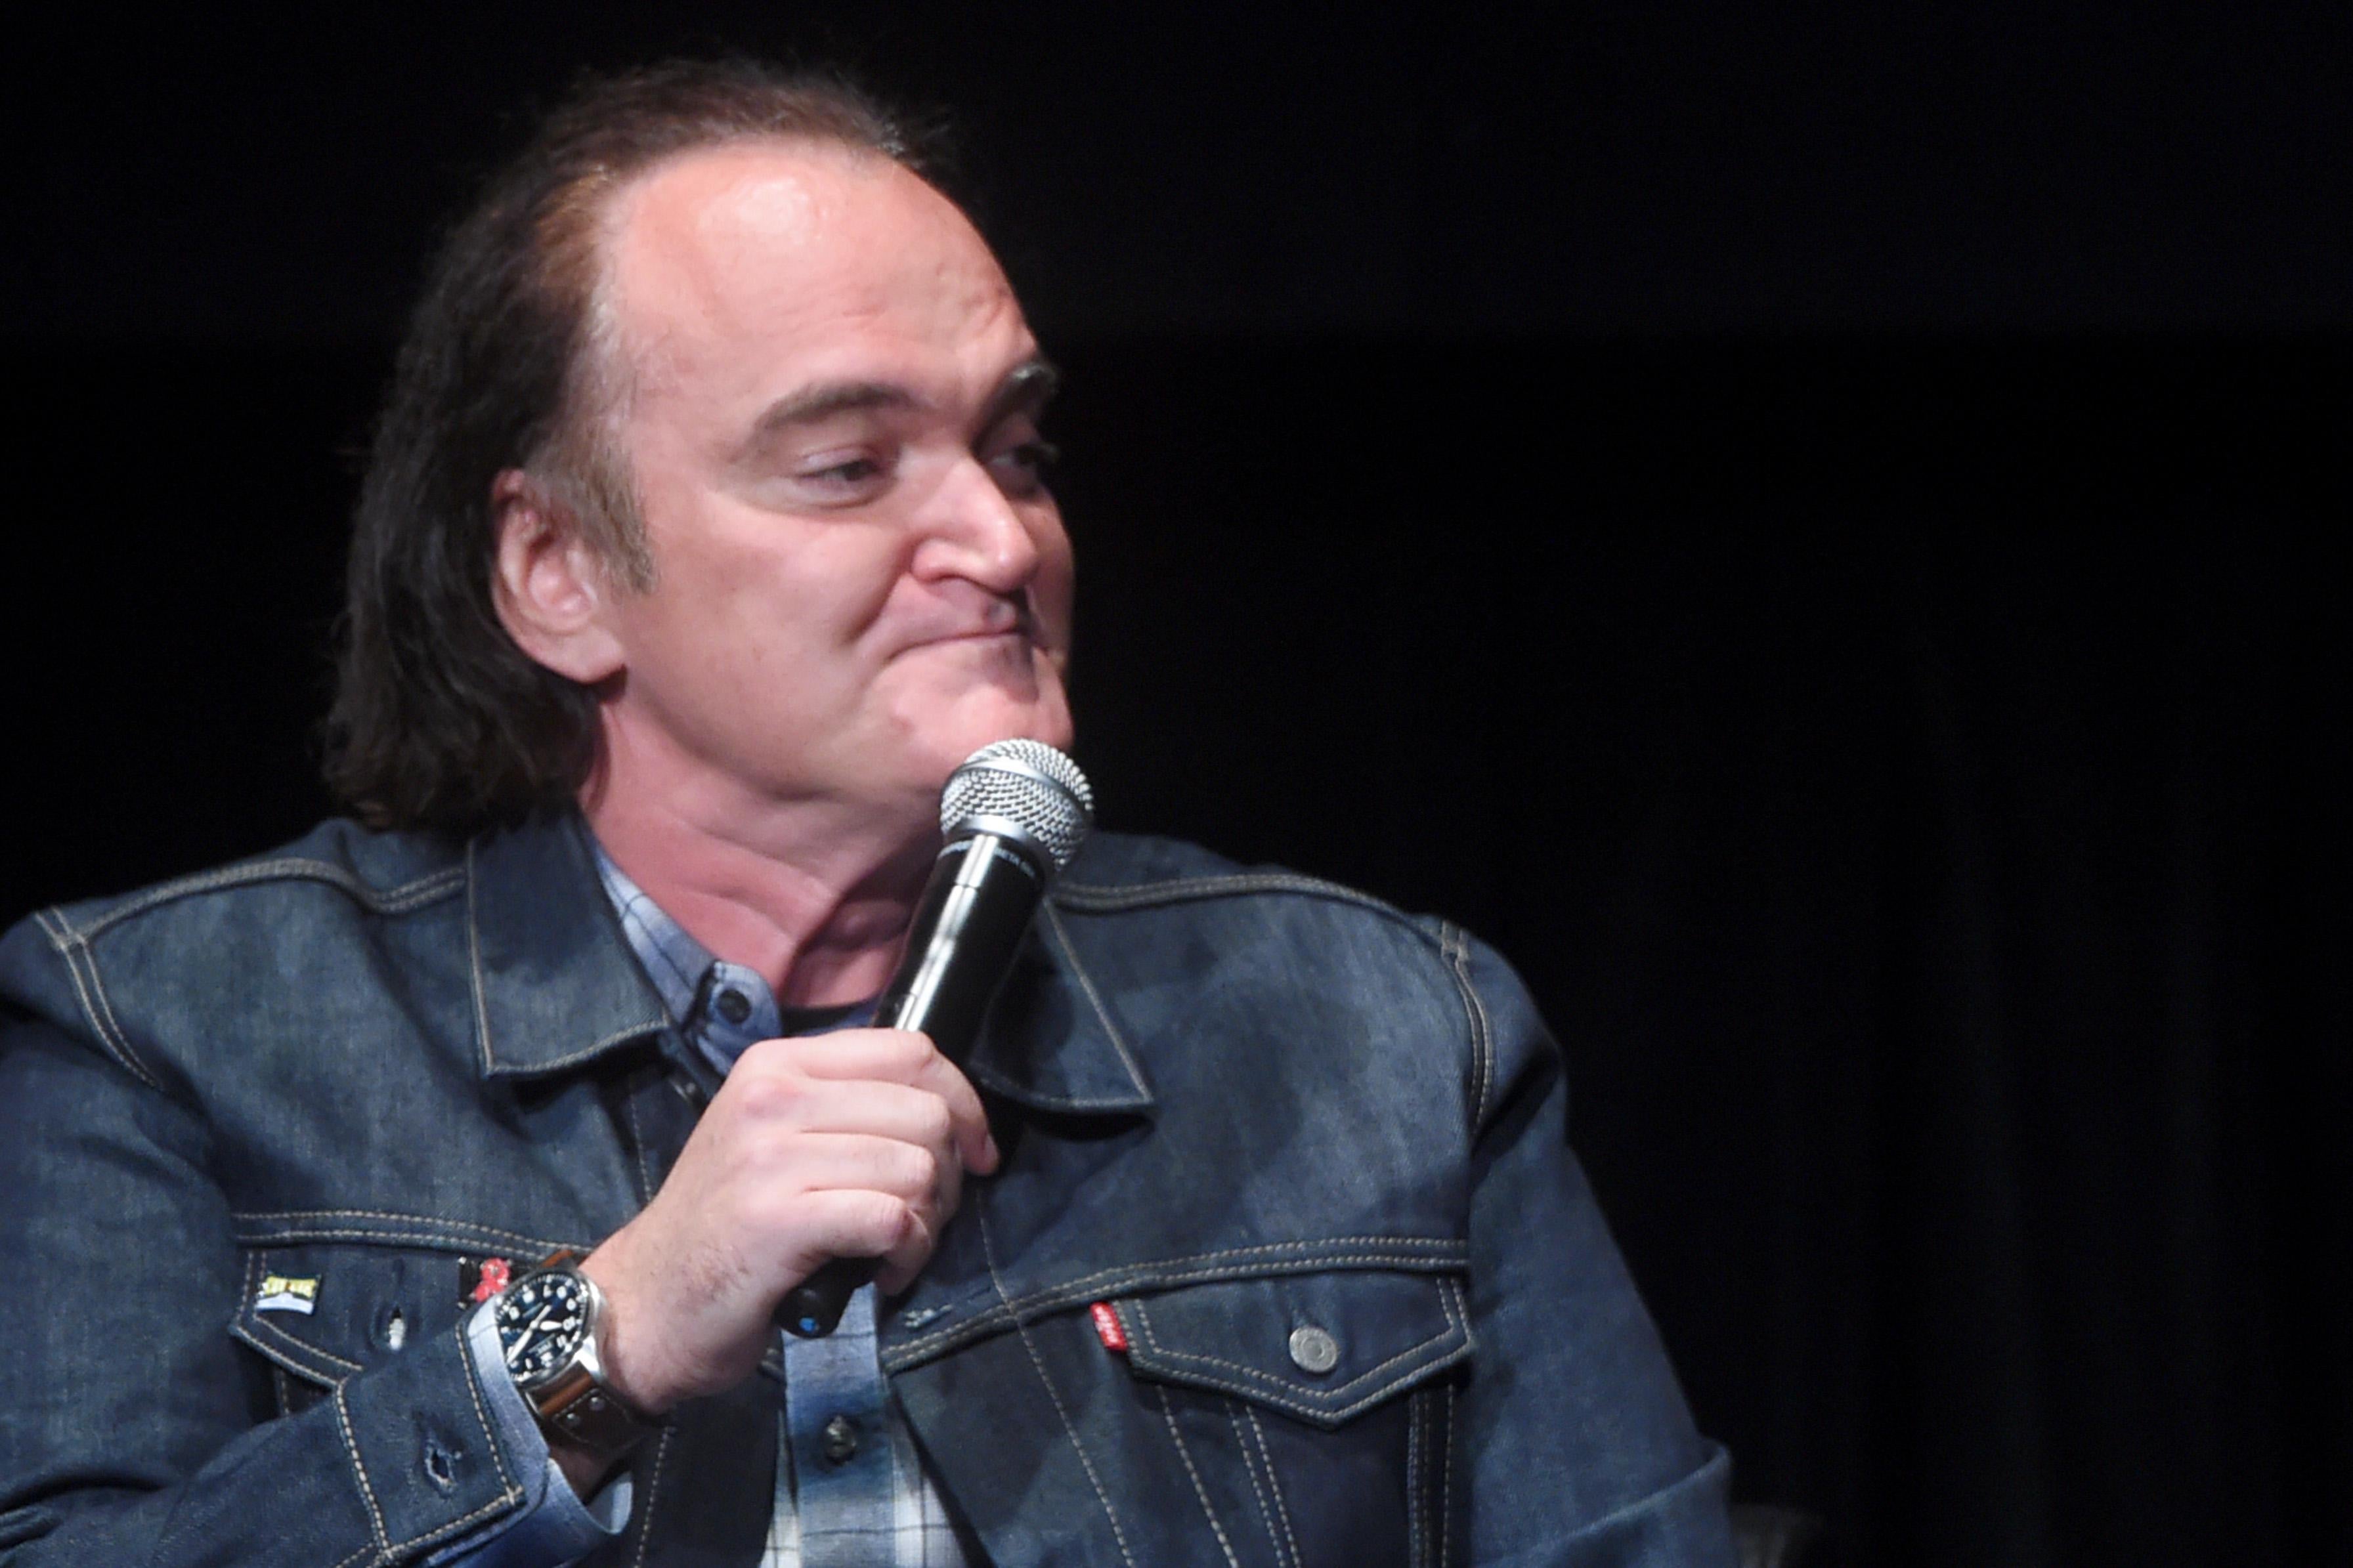 Quentin Tarantino speaks onstage during the panel for the Reservoir Dogs screening at the Tribeca Film Festival.